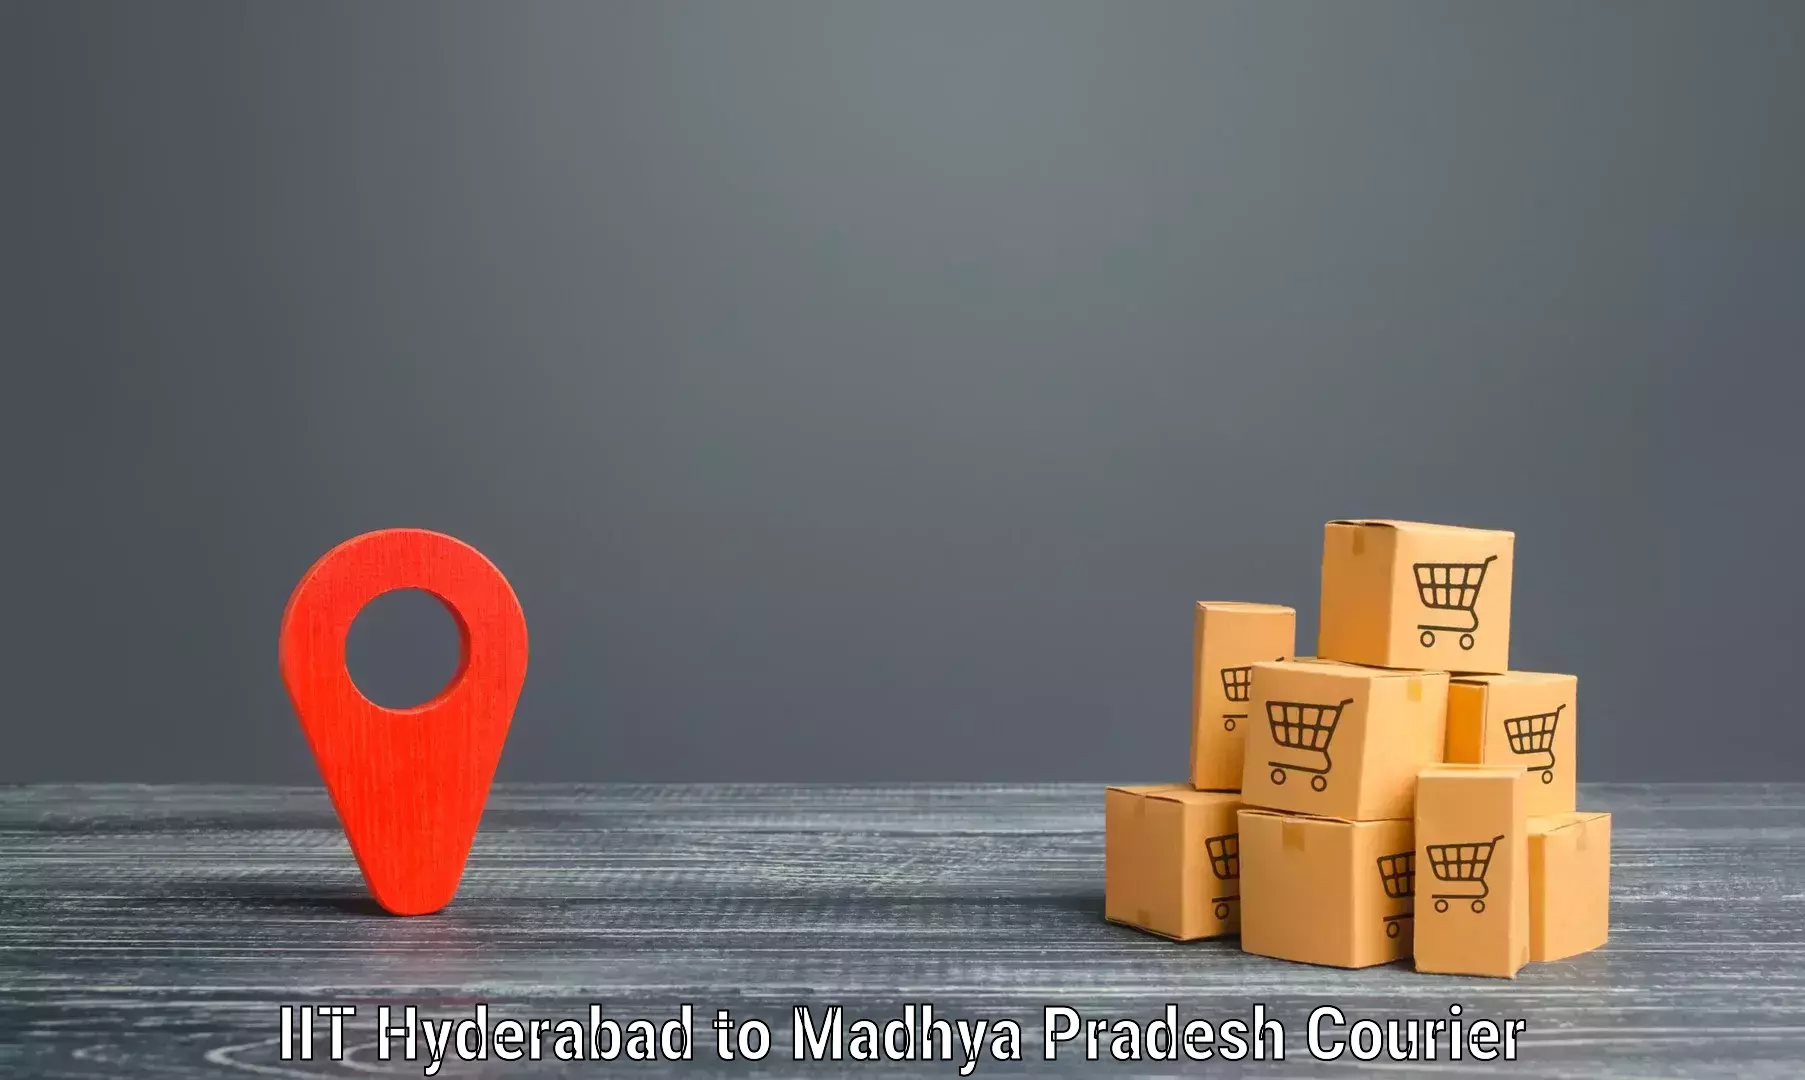 Professional parcel services IIT Hyderabad to Raipur Karchuliyan